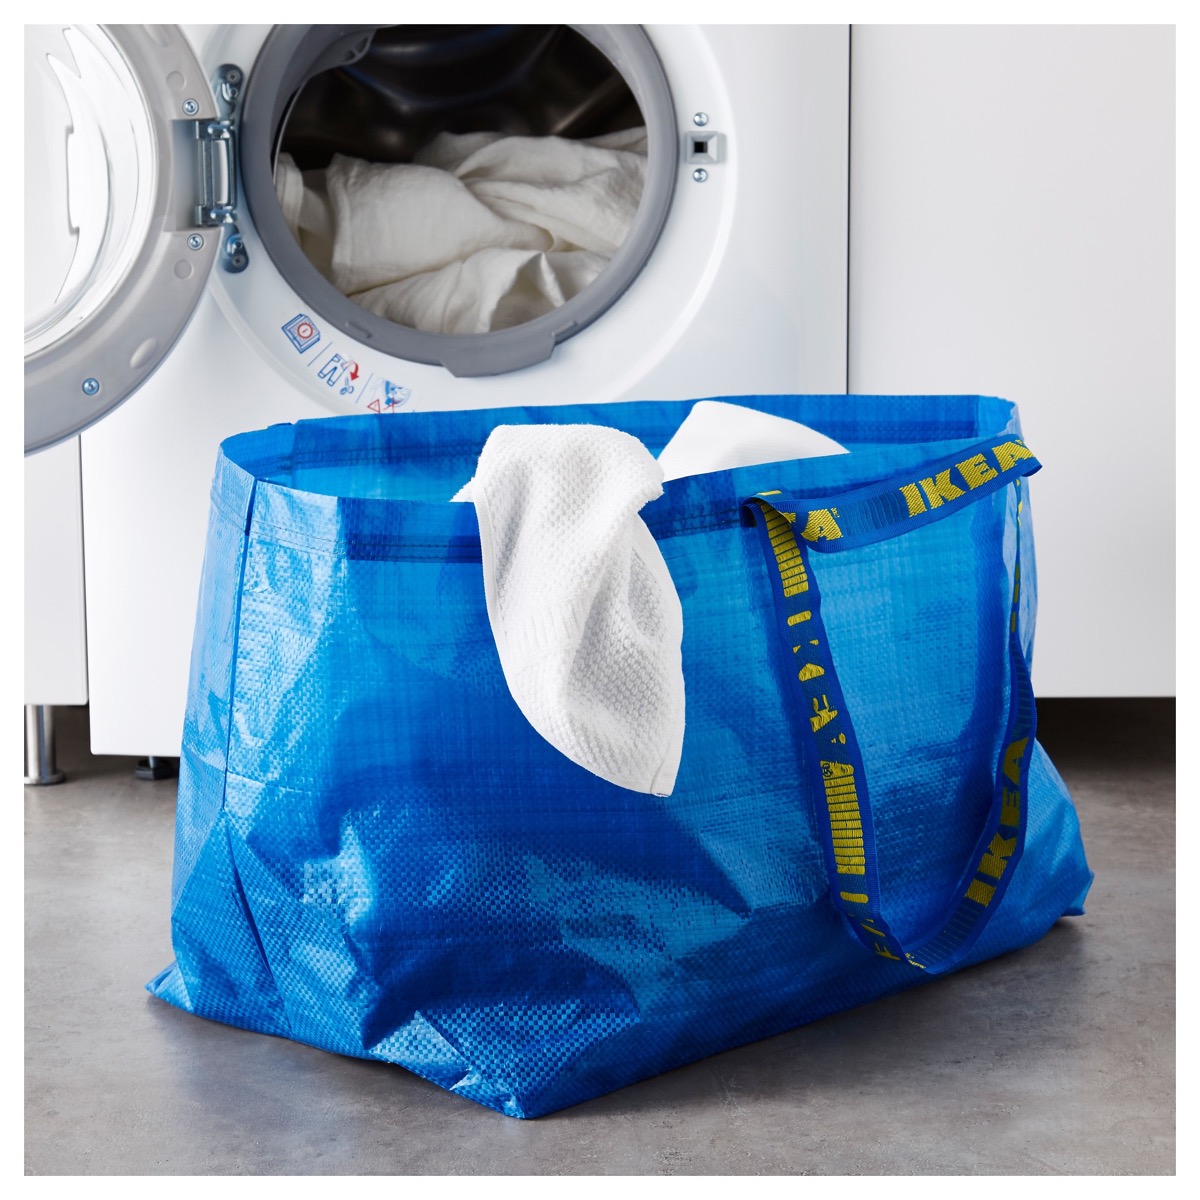 Ikea Blue Bag For Laundry {Other Uses For Blue Ikea Bag}